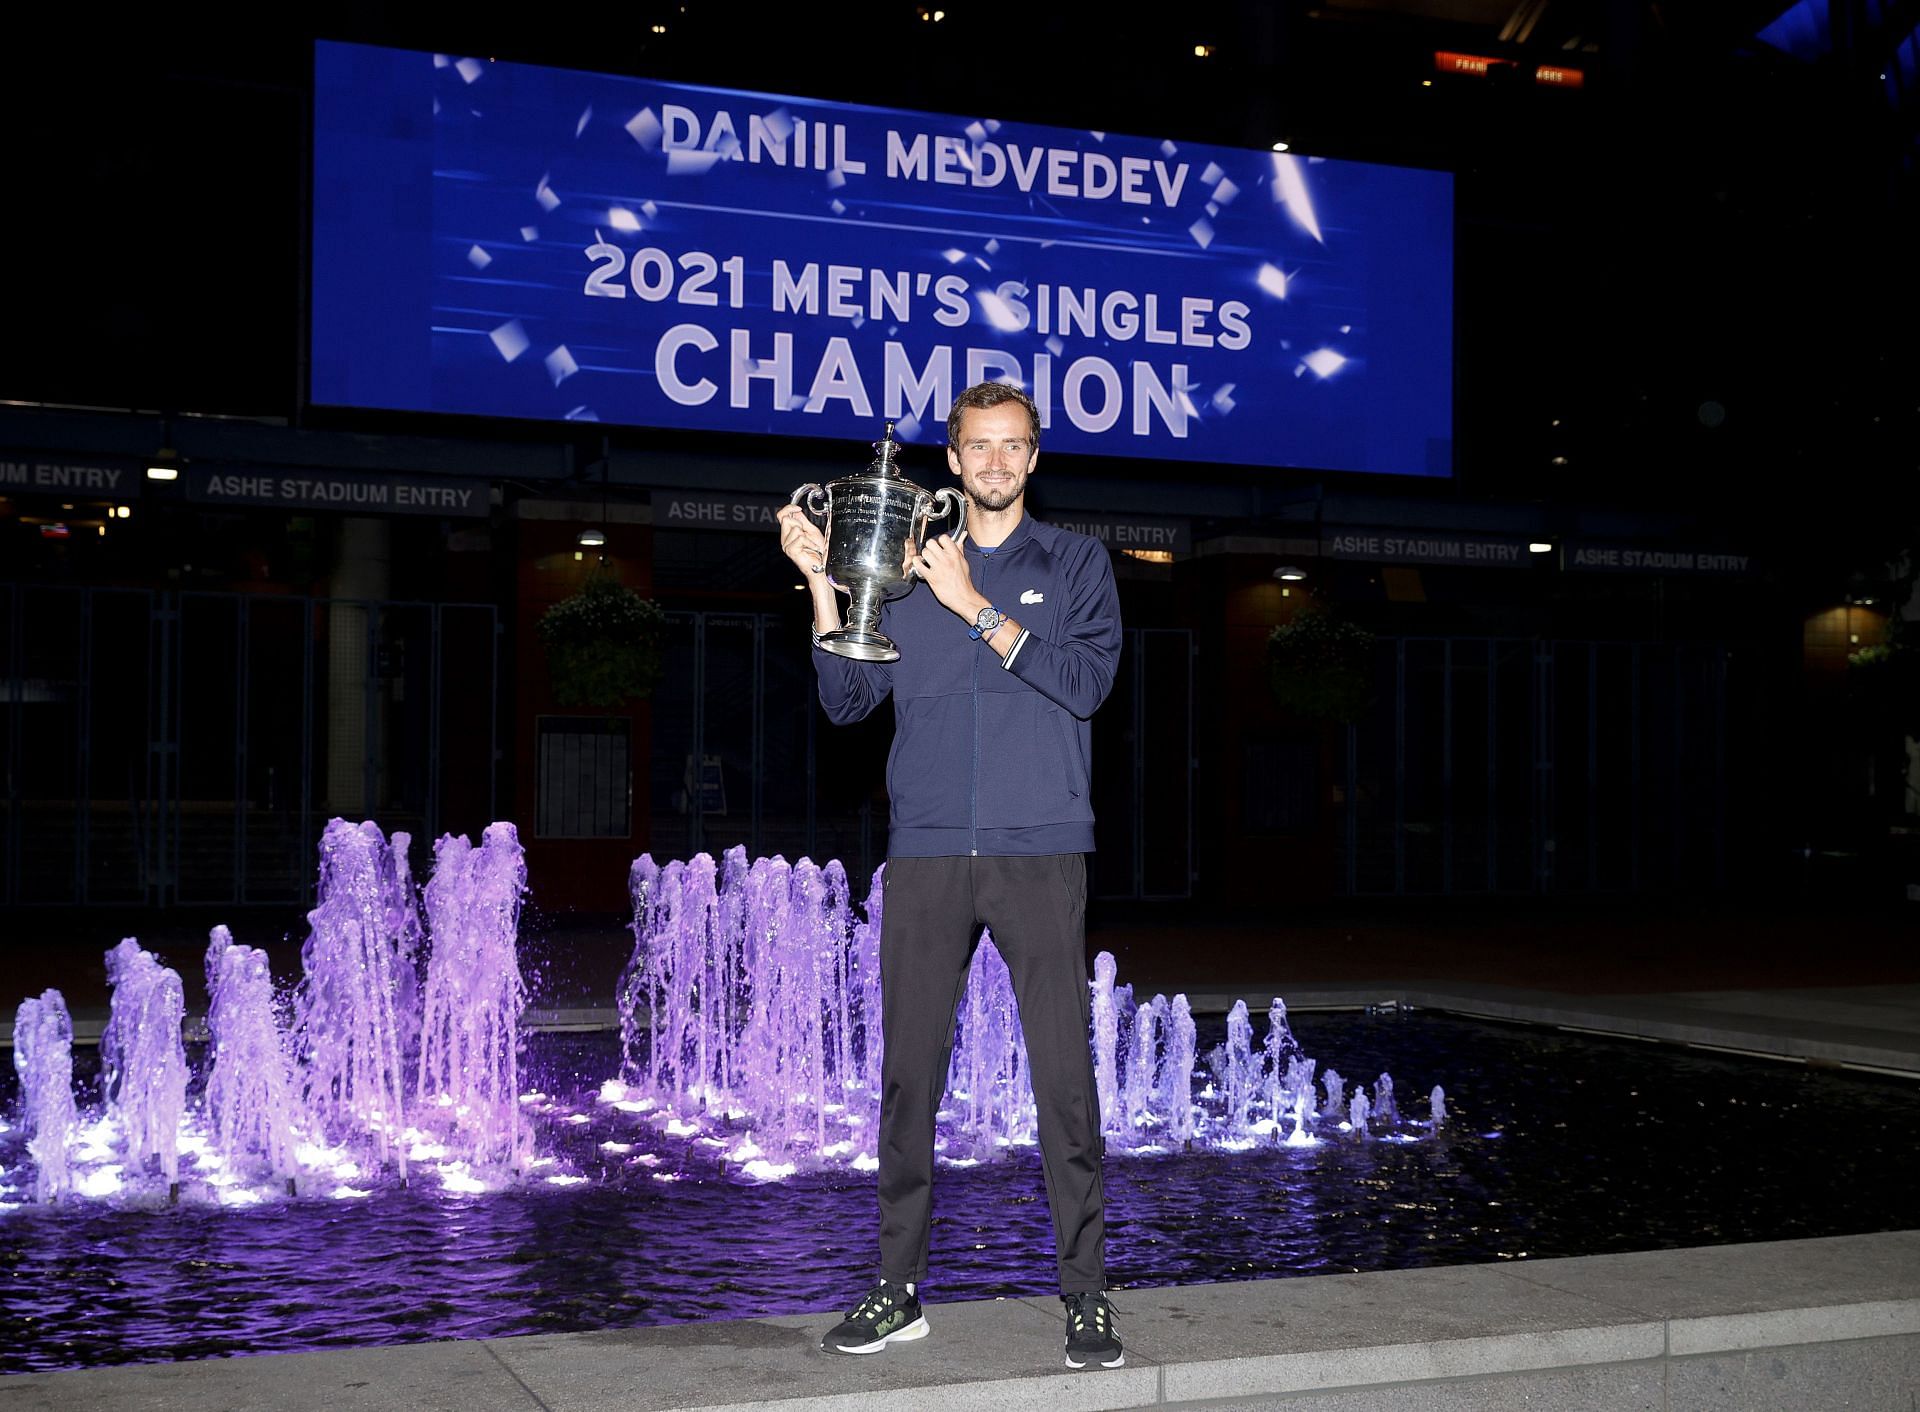 Daniil Medvedev with the US Open 2021 title